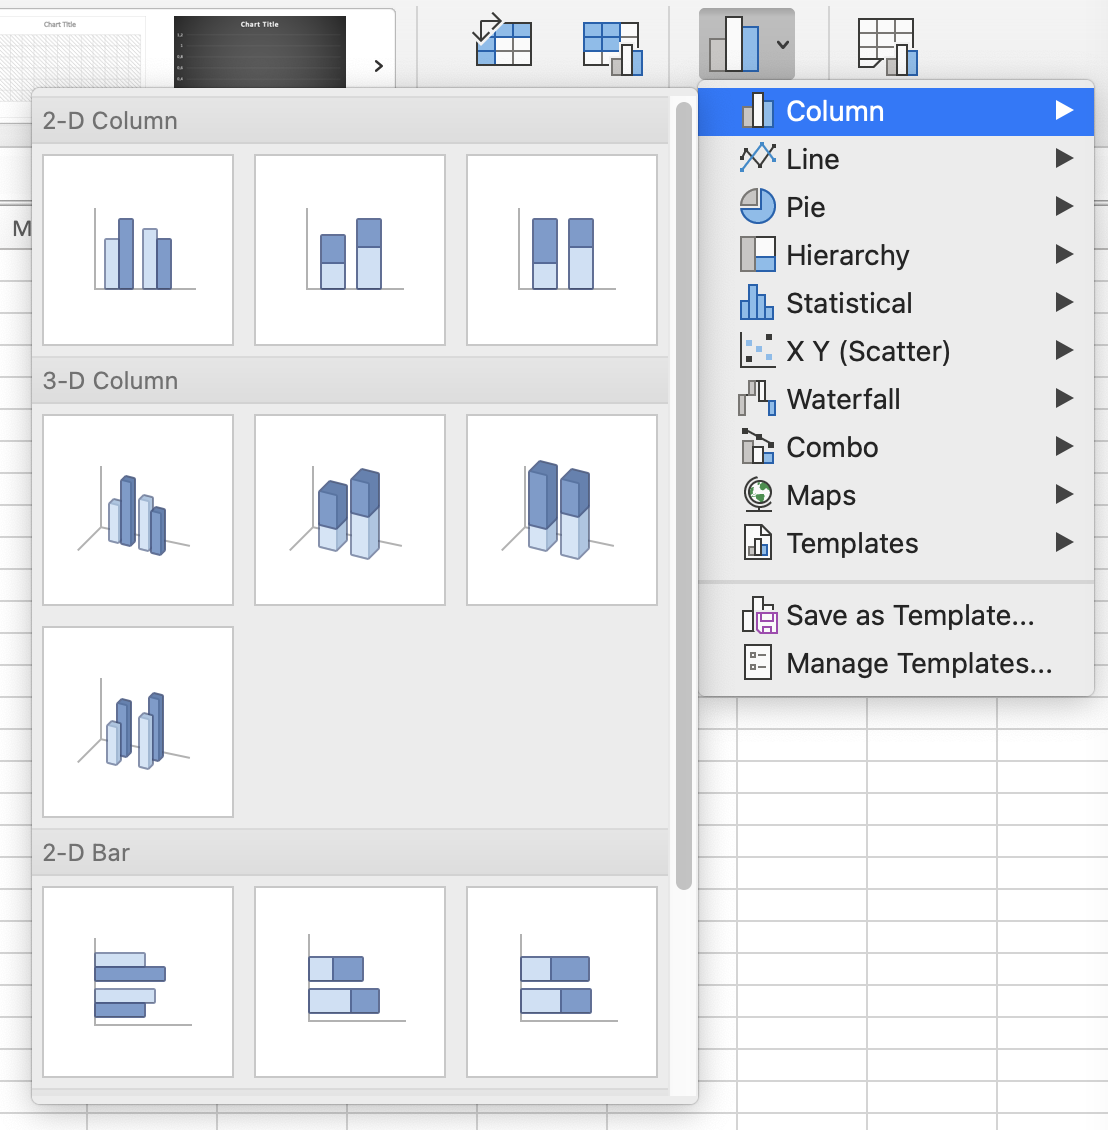 Screenshot of the list of chart templates avaiable in Microsoft Excel